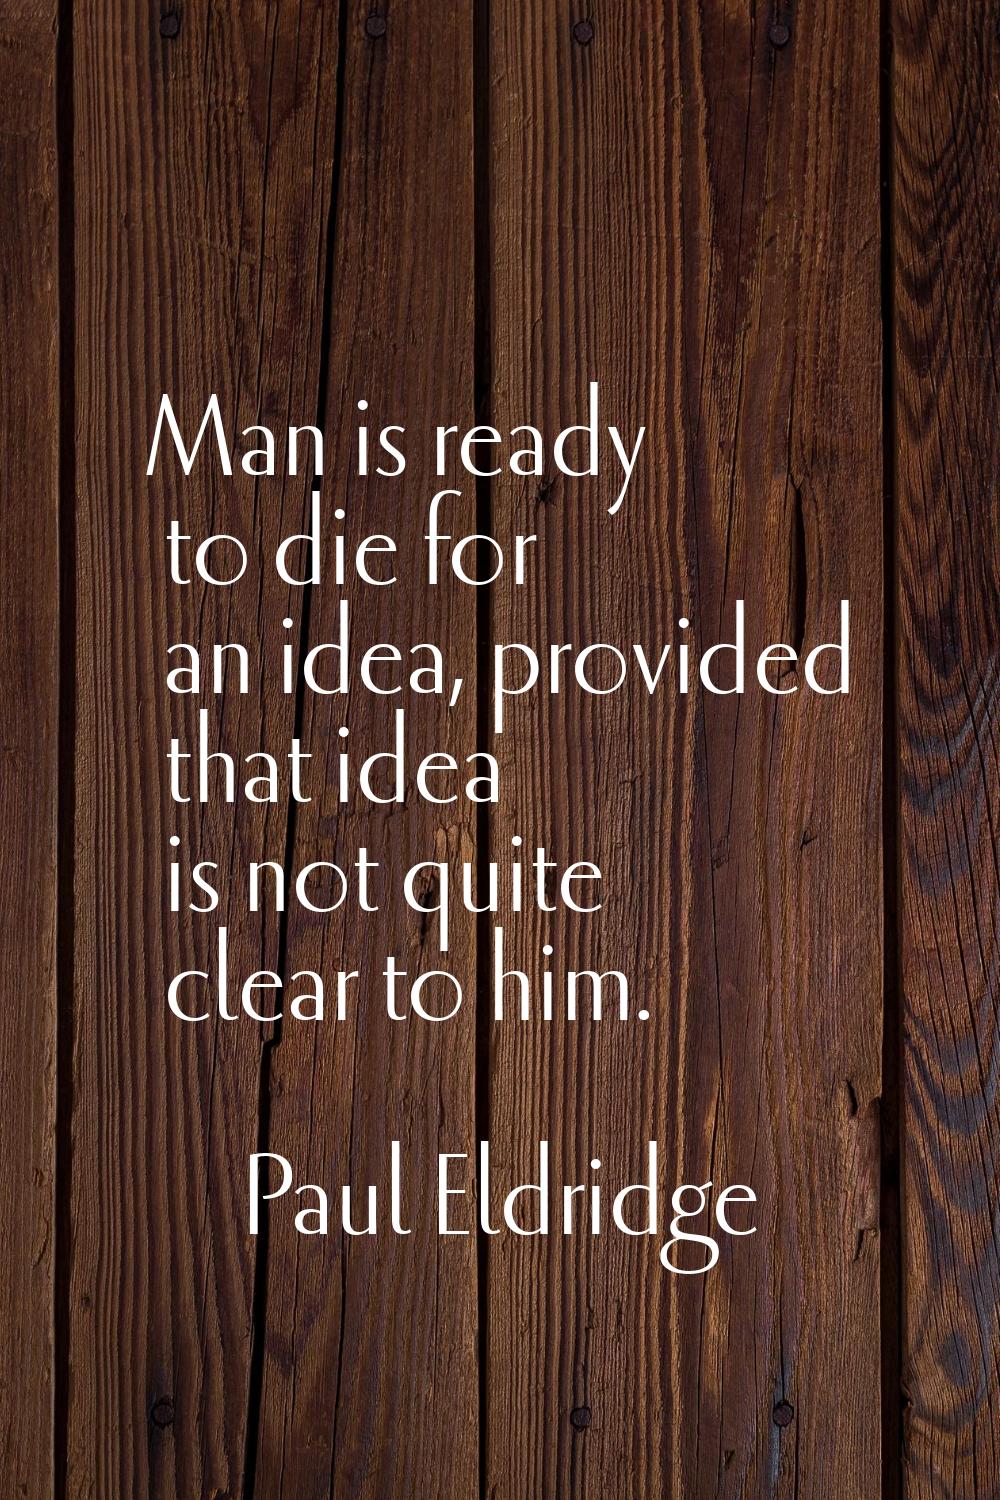 Man is ready to die for an idea, provided that idea is not quite clear to him.